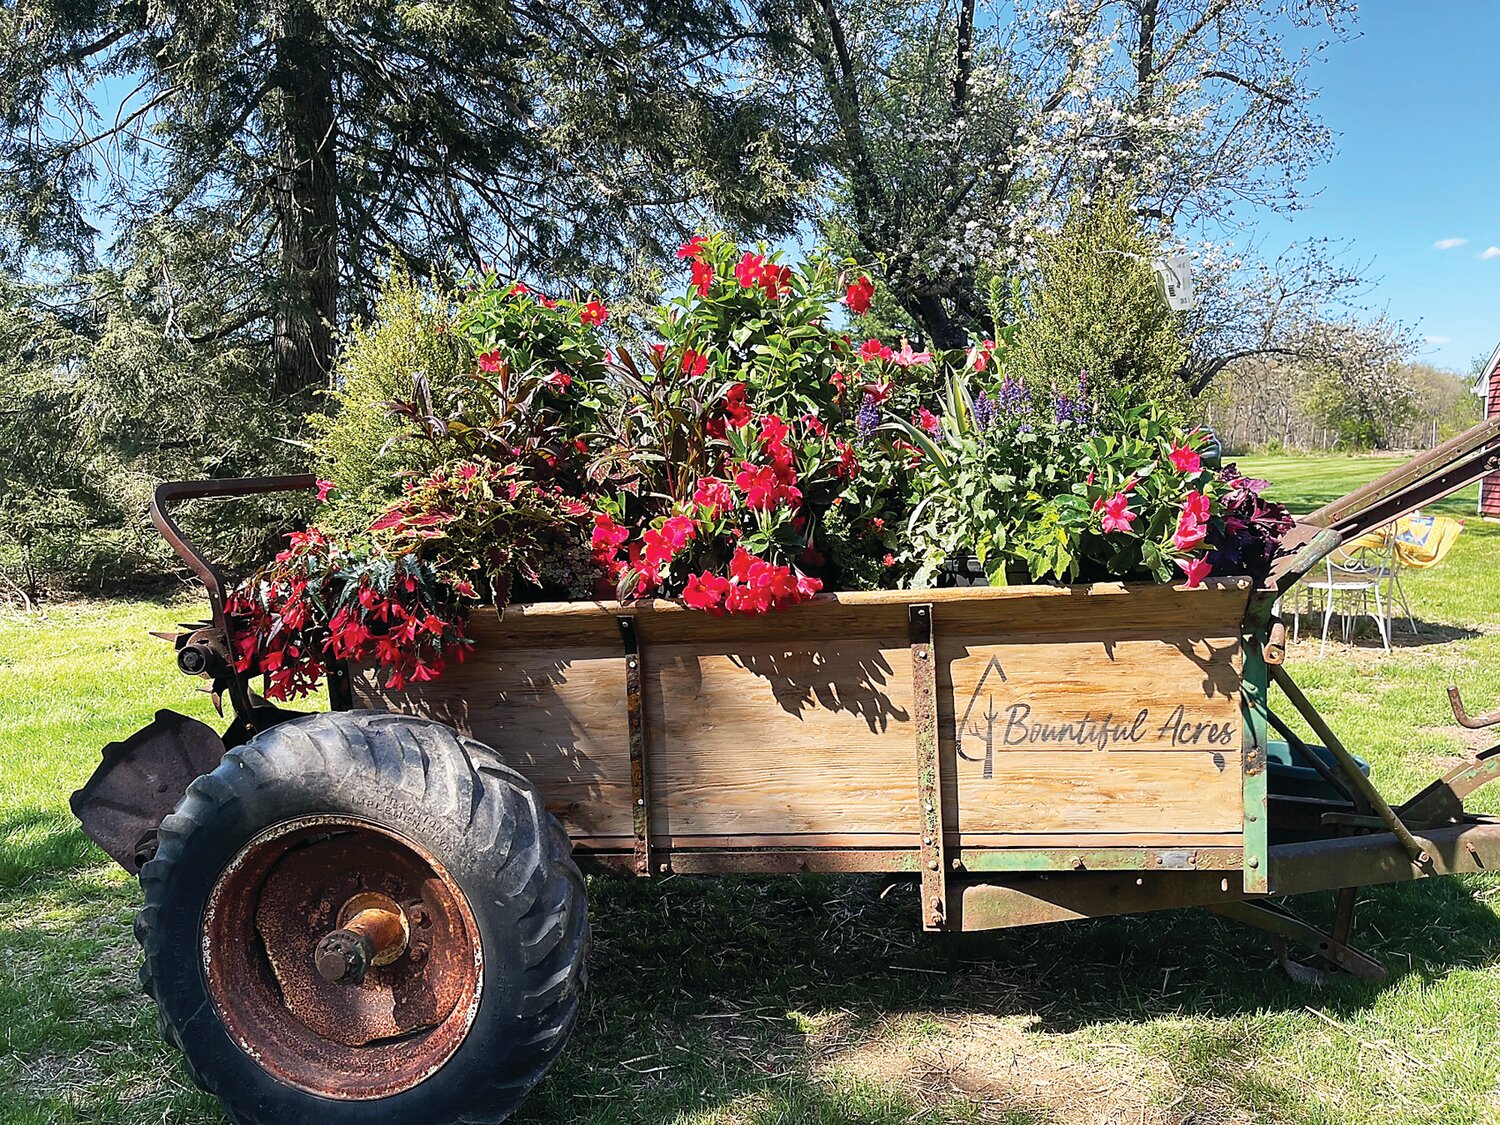 A spreader from the 1950s has been re-purposed as a large planter at Sycamore Lane